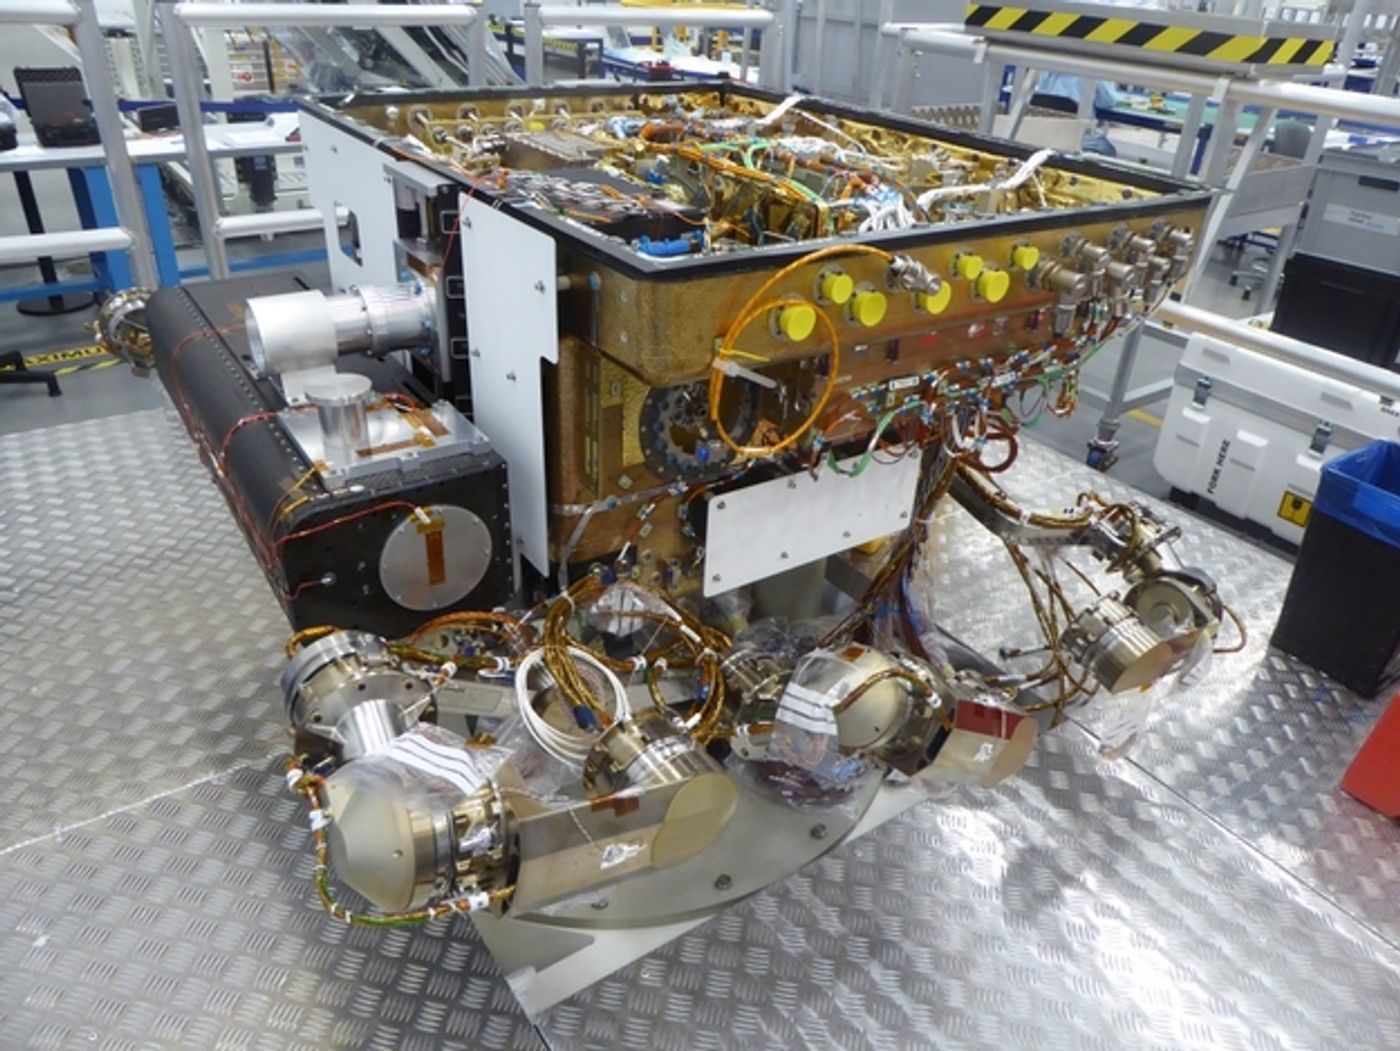 The ExoMars rover STM undergoes critical stress-testing.